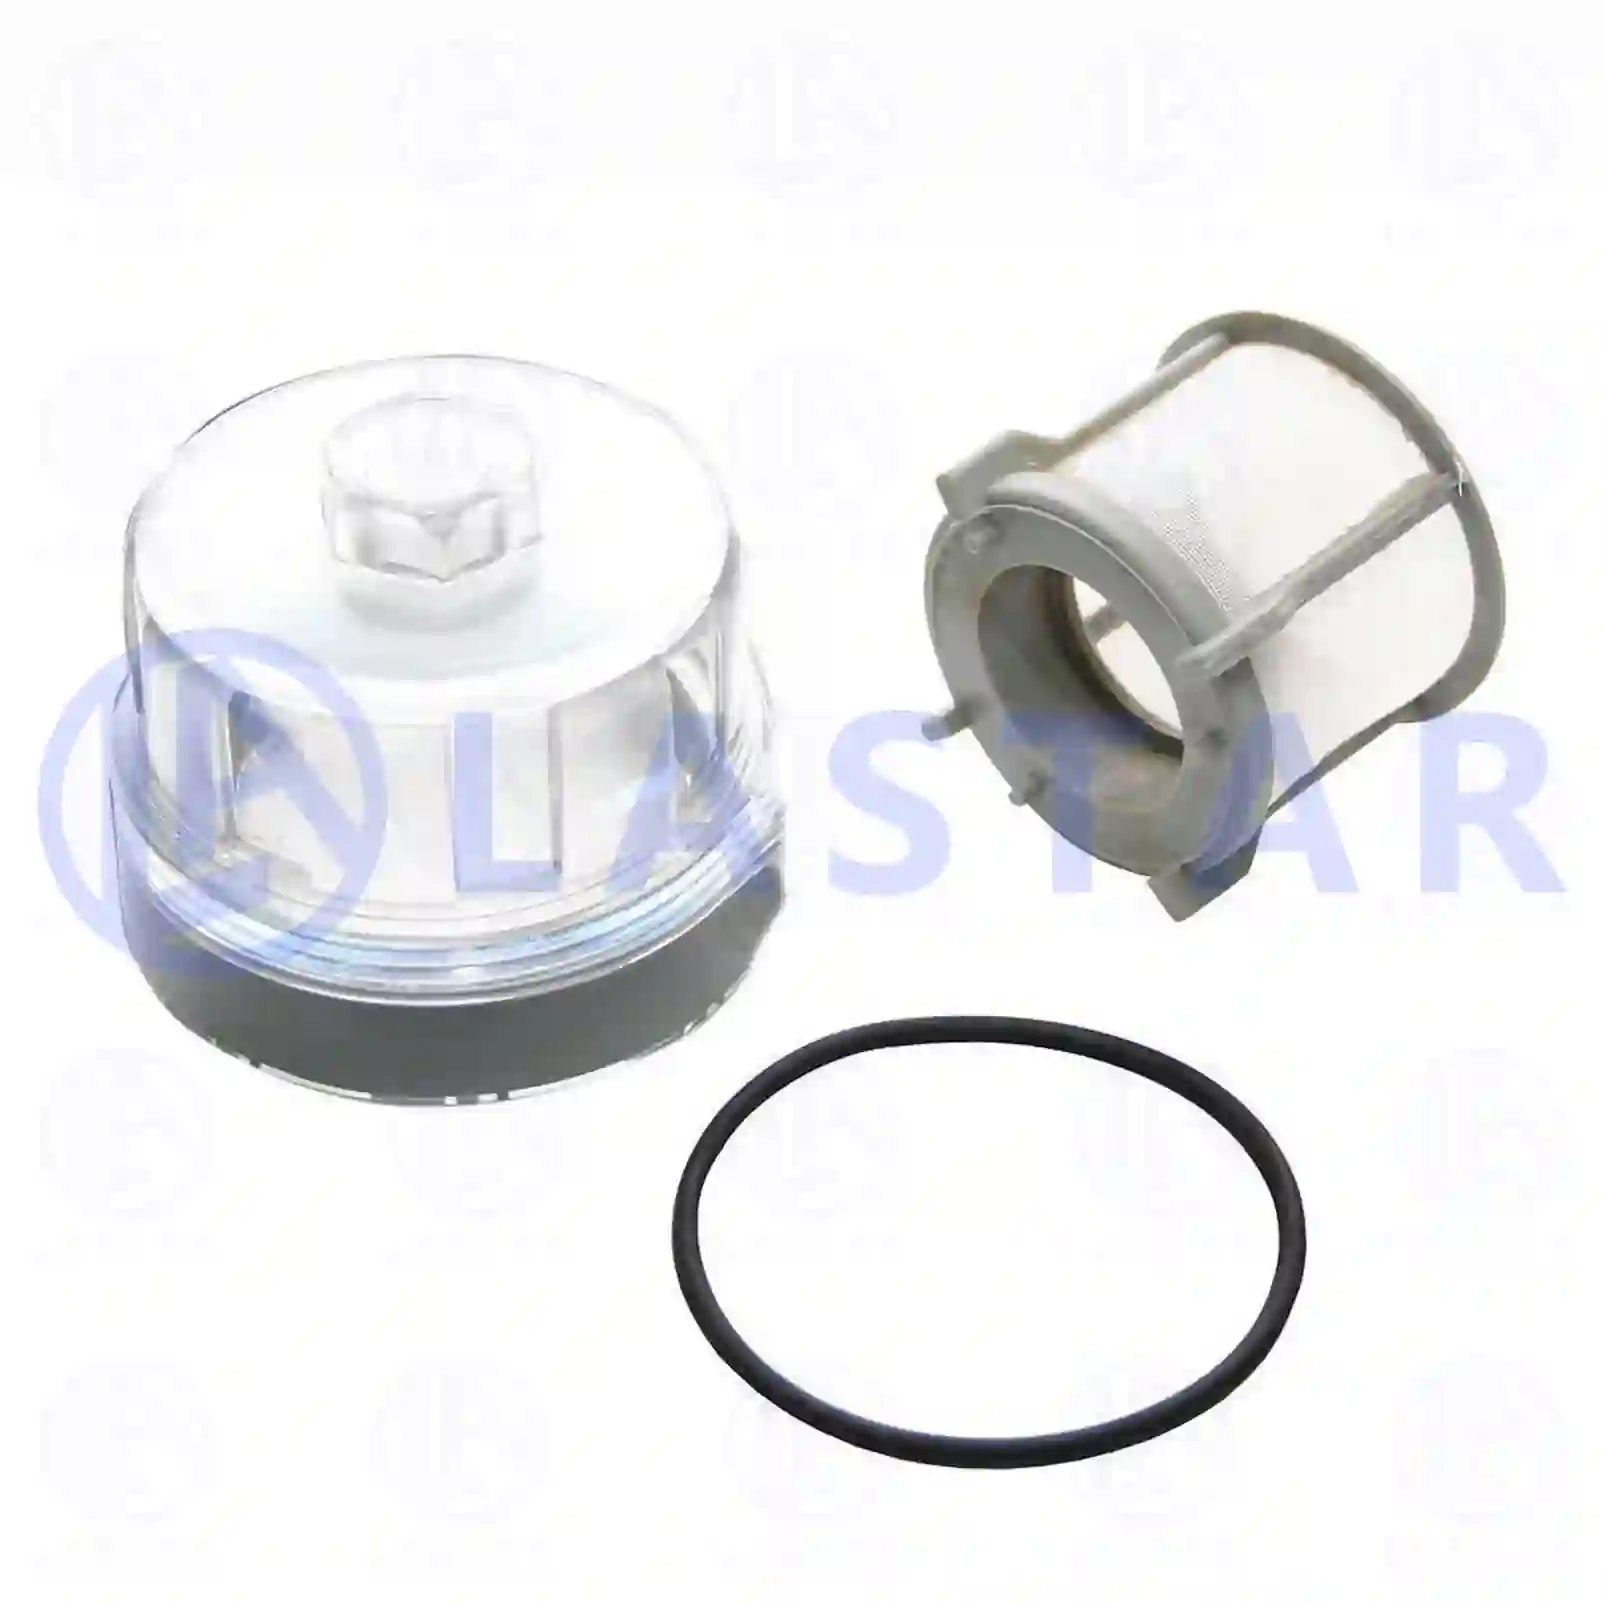 Filter repair kit, with filter housing, 77724070, 1604476, 51125020014S, 51125030062S, 0000900751S, 0000902051S, ZG10411-0008 ||  77724070 Lastar Spare Part | Truck Spare Parts, Auotomotive Spare Parts Filter repair kit, with filter housing, 77724070, 1604476, 51125020014S, 51125030062S, 0000900751S, 0000902051S, ZG10411-0008 ||  77724070 Lastar Spare Part | Truck Spare Parts, Auotomotive Spare Parts